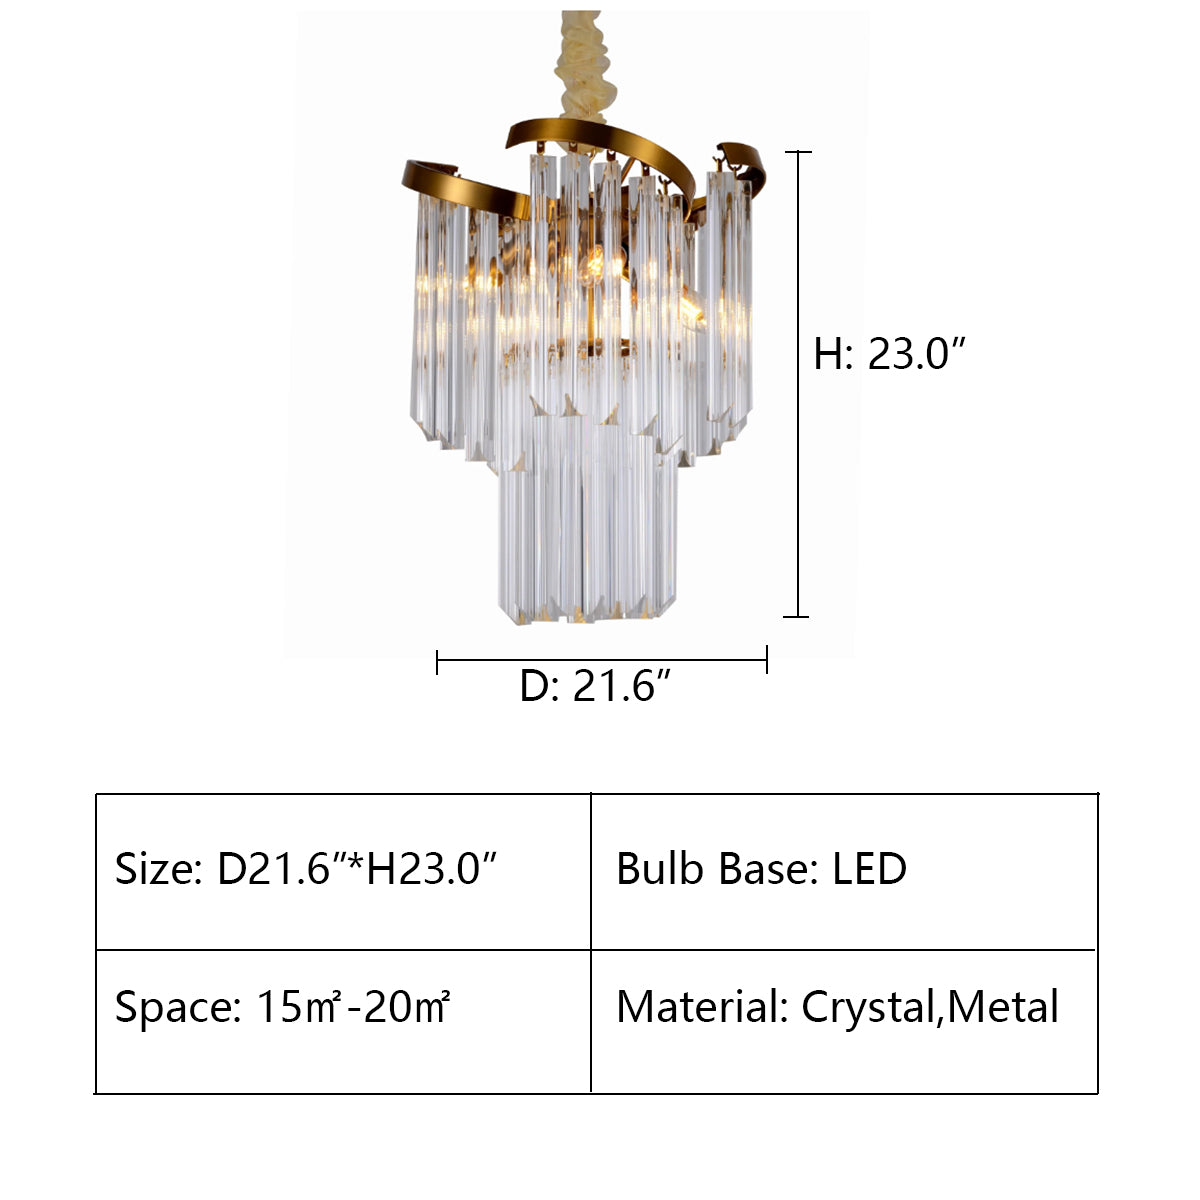 D21.6"*H23.0" TWIN PALMS ROUND CRYSTAL CHANDELIER,chandelier,chandeliers,pendant,ceiling,crystal,spiral,tiers,layers,multi-tier,multi-layer,living room,dining room,bedroom